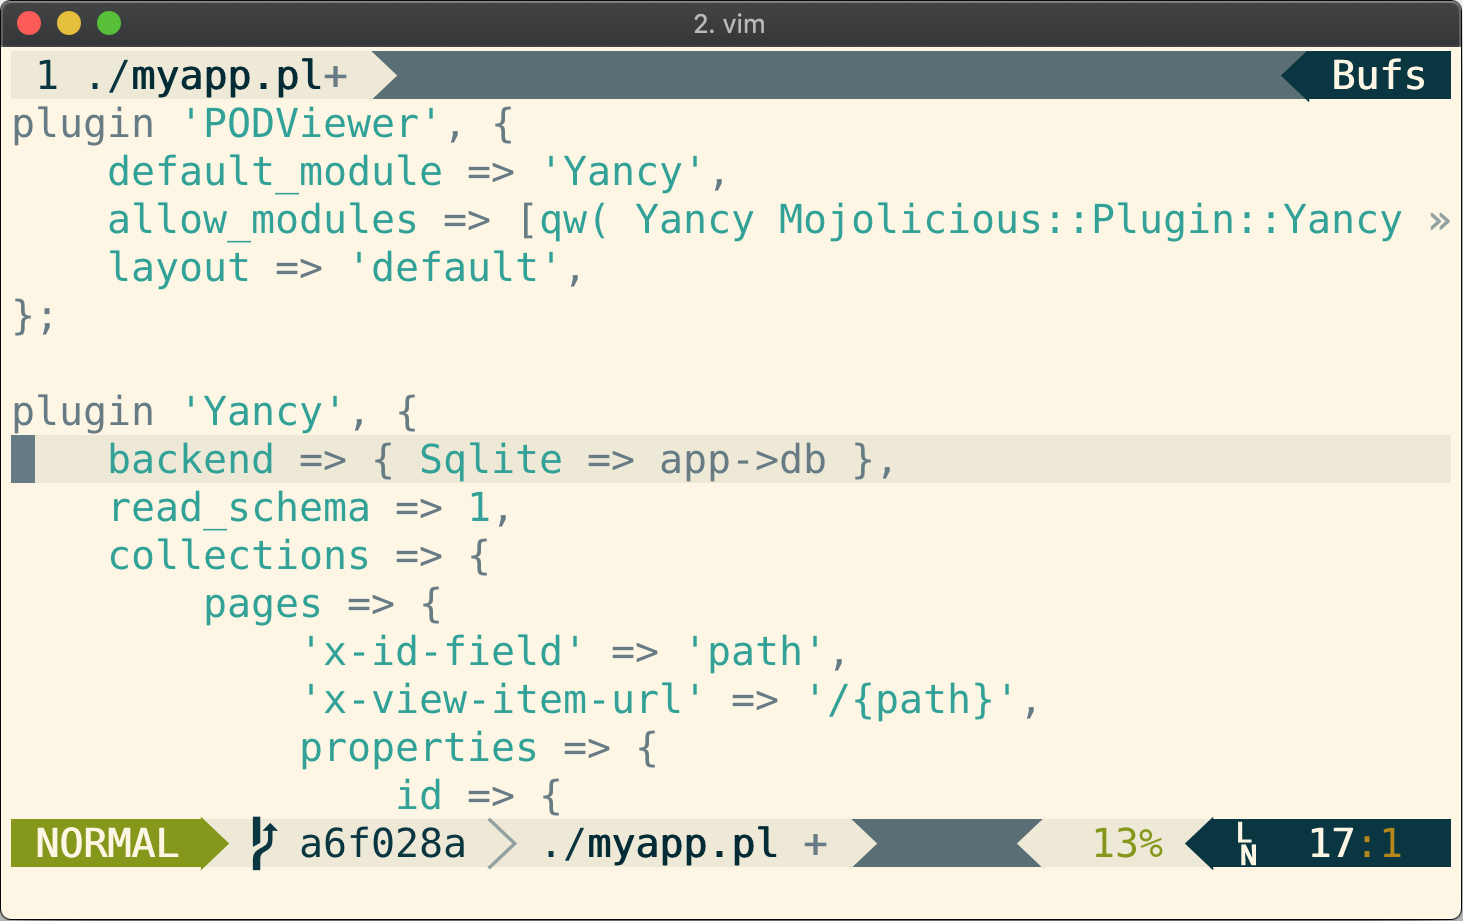 The Yancy plugin configuration with SQLite backend